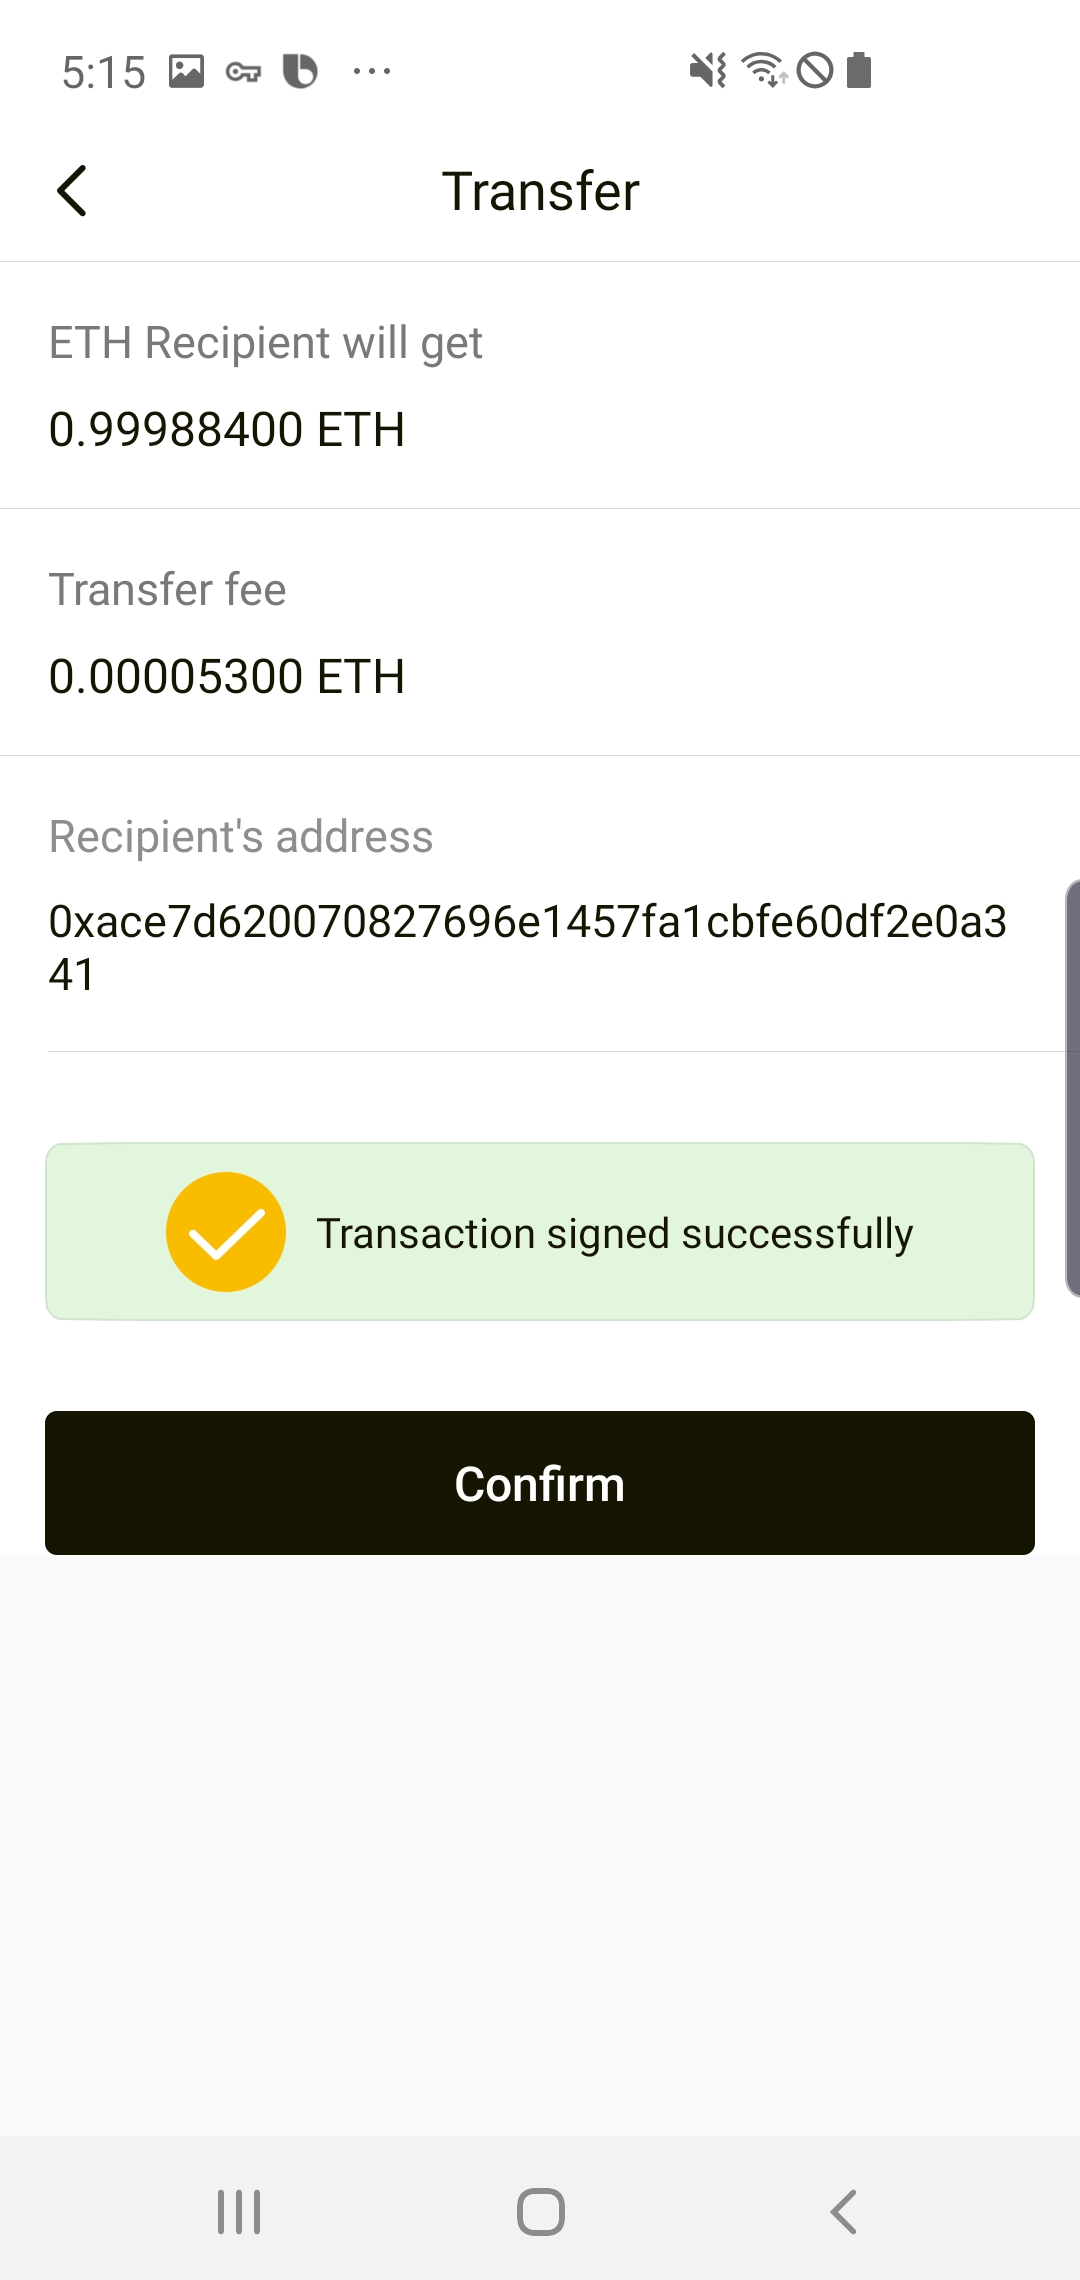 5.1_transaction_signed_successfully.jpg